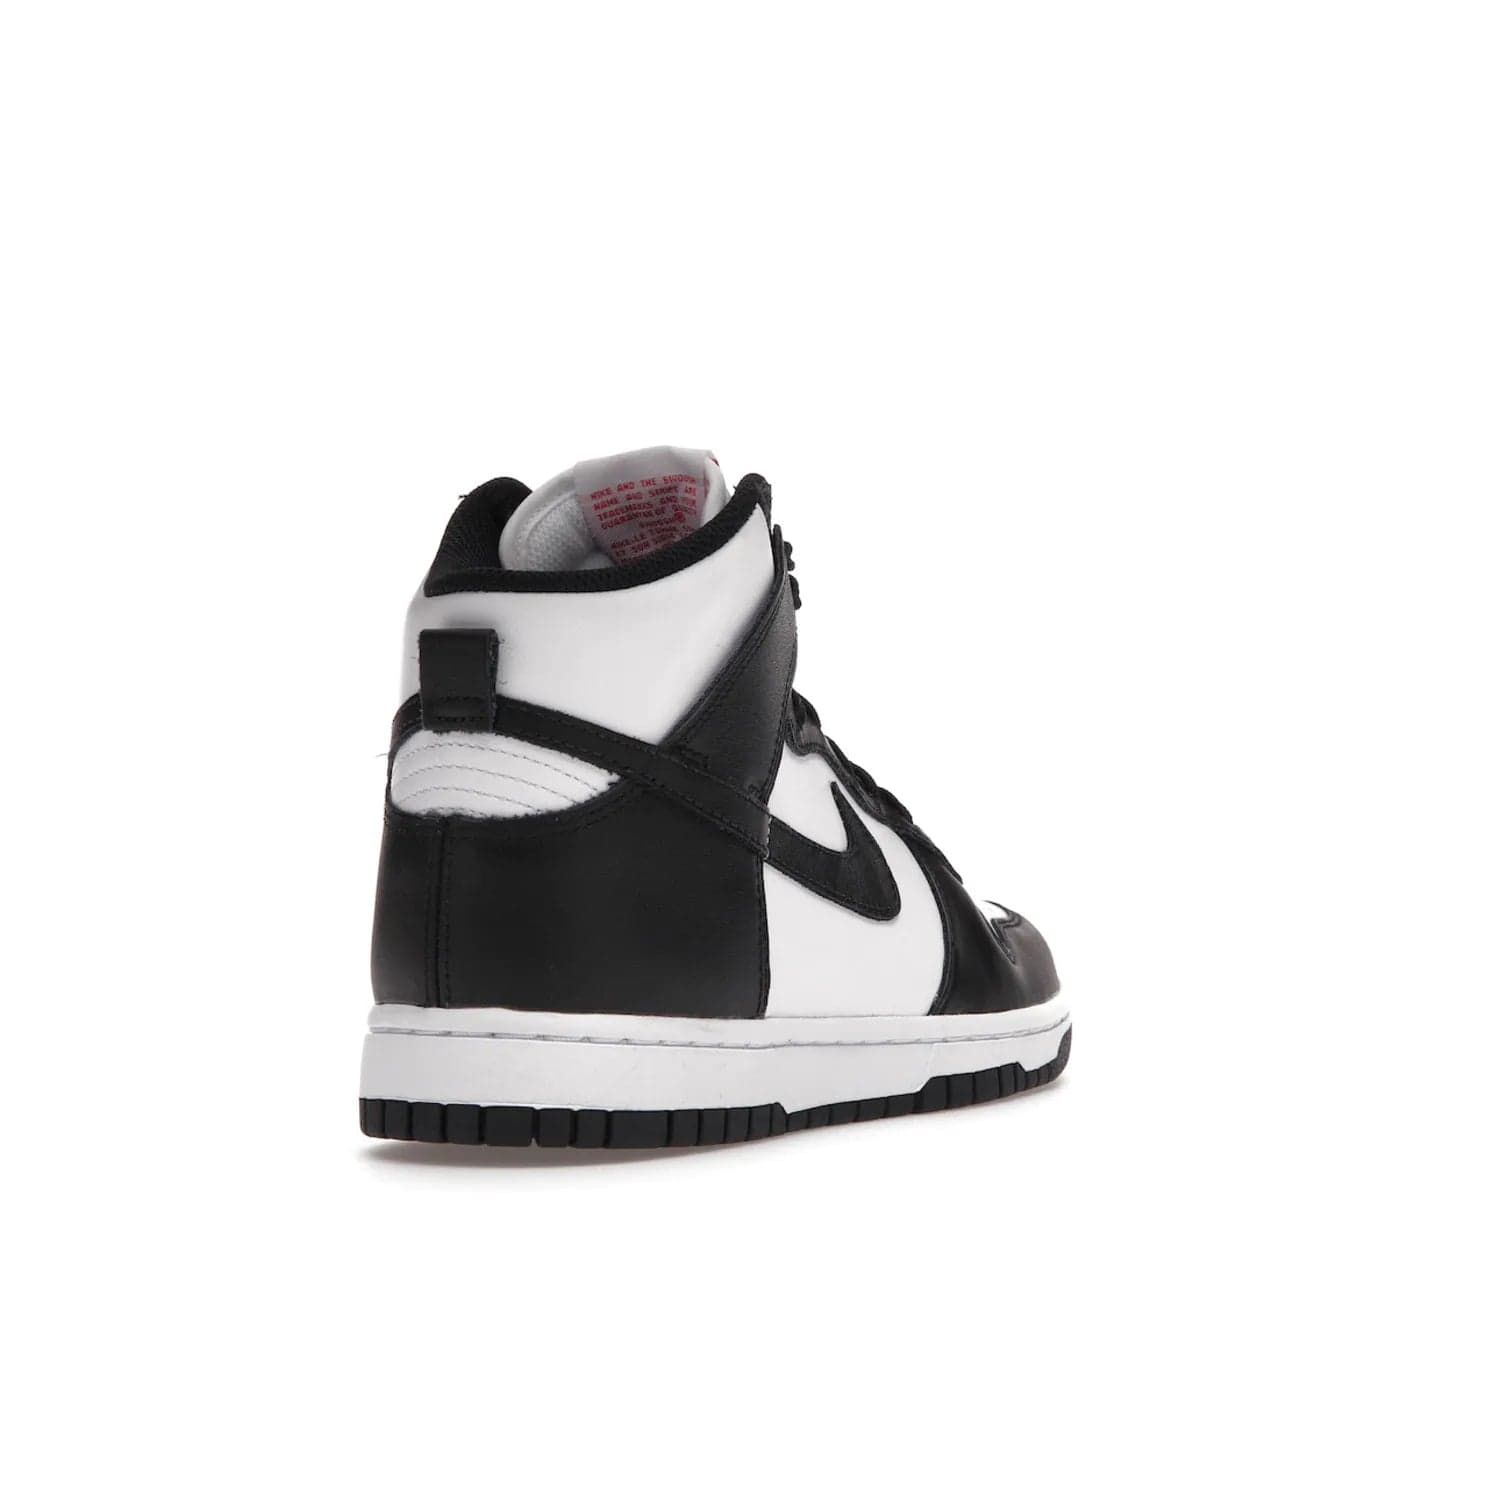 Nike Dunk High Panda (2021) (Women's) - Image 31 - Only at www.BallersClubKickz.com - The Nike Dunk High Panda (2021) (Women's) shoe offers stylish comfort. Featuring black and white leather uppers, a matching sole, with a red woven tongue label, this luxurious shoe will make any outfit stand out. Dare to be different and add to your wardrobe today!